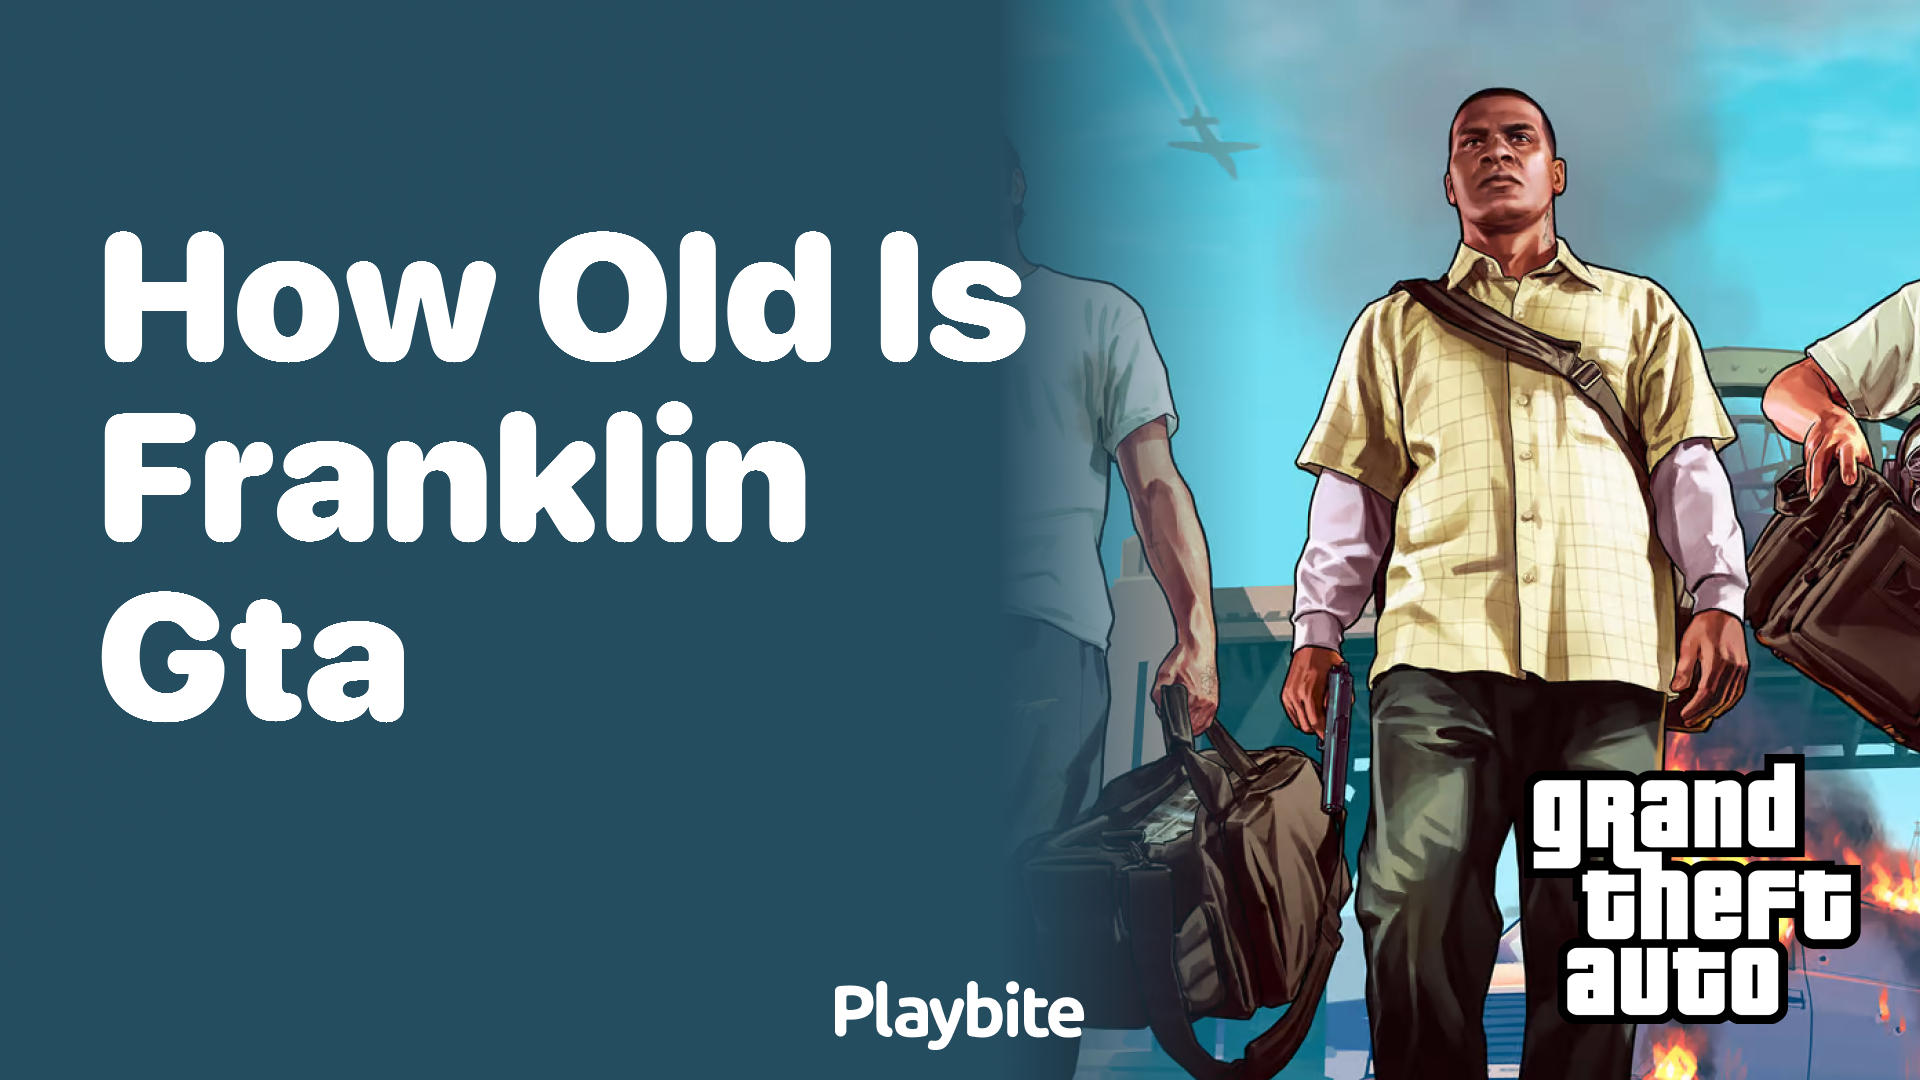 How old is Franklin in GTA?